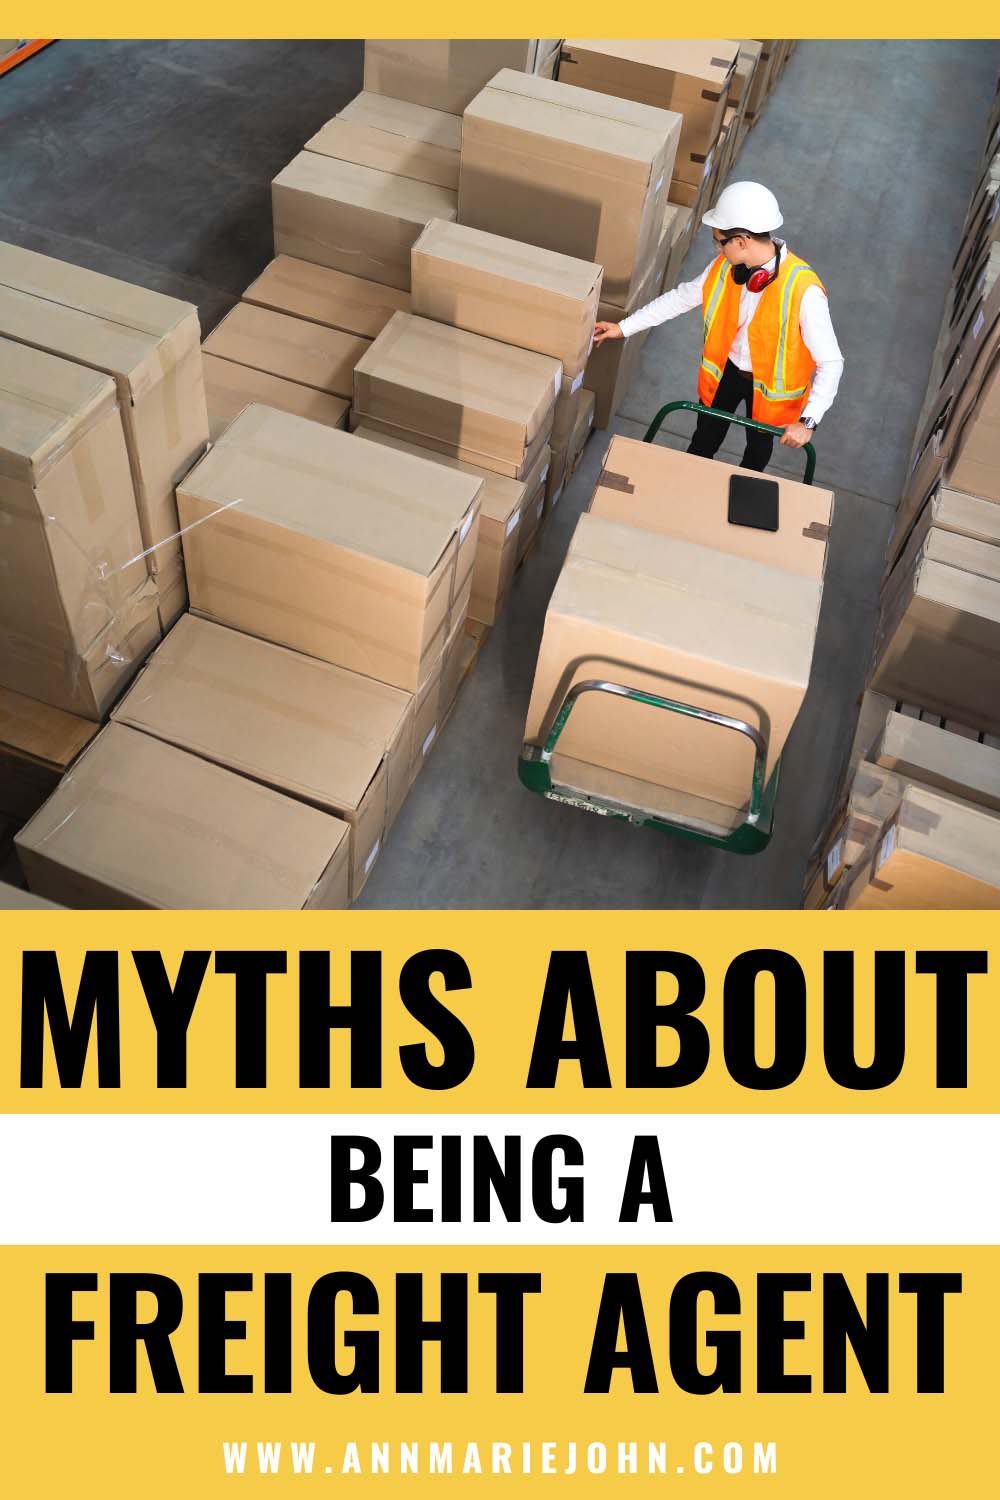 Myths About Being a Freight Agent